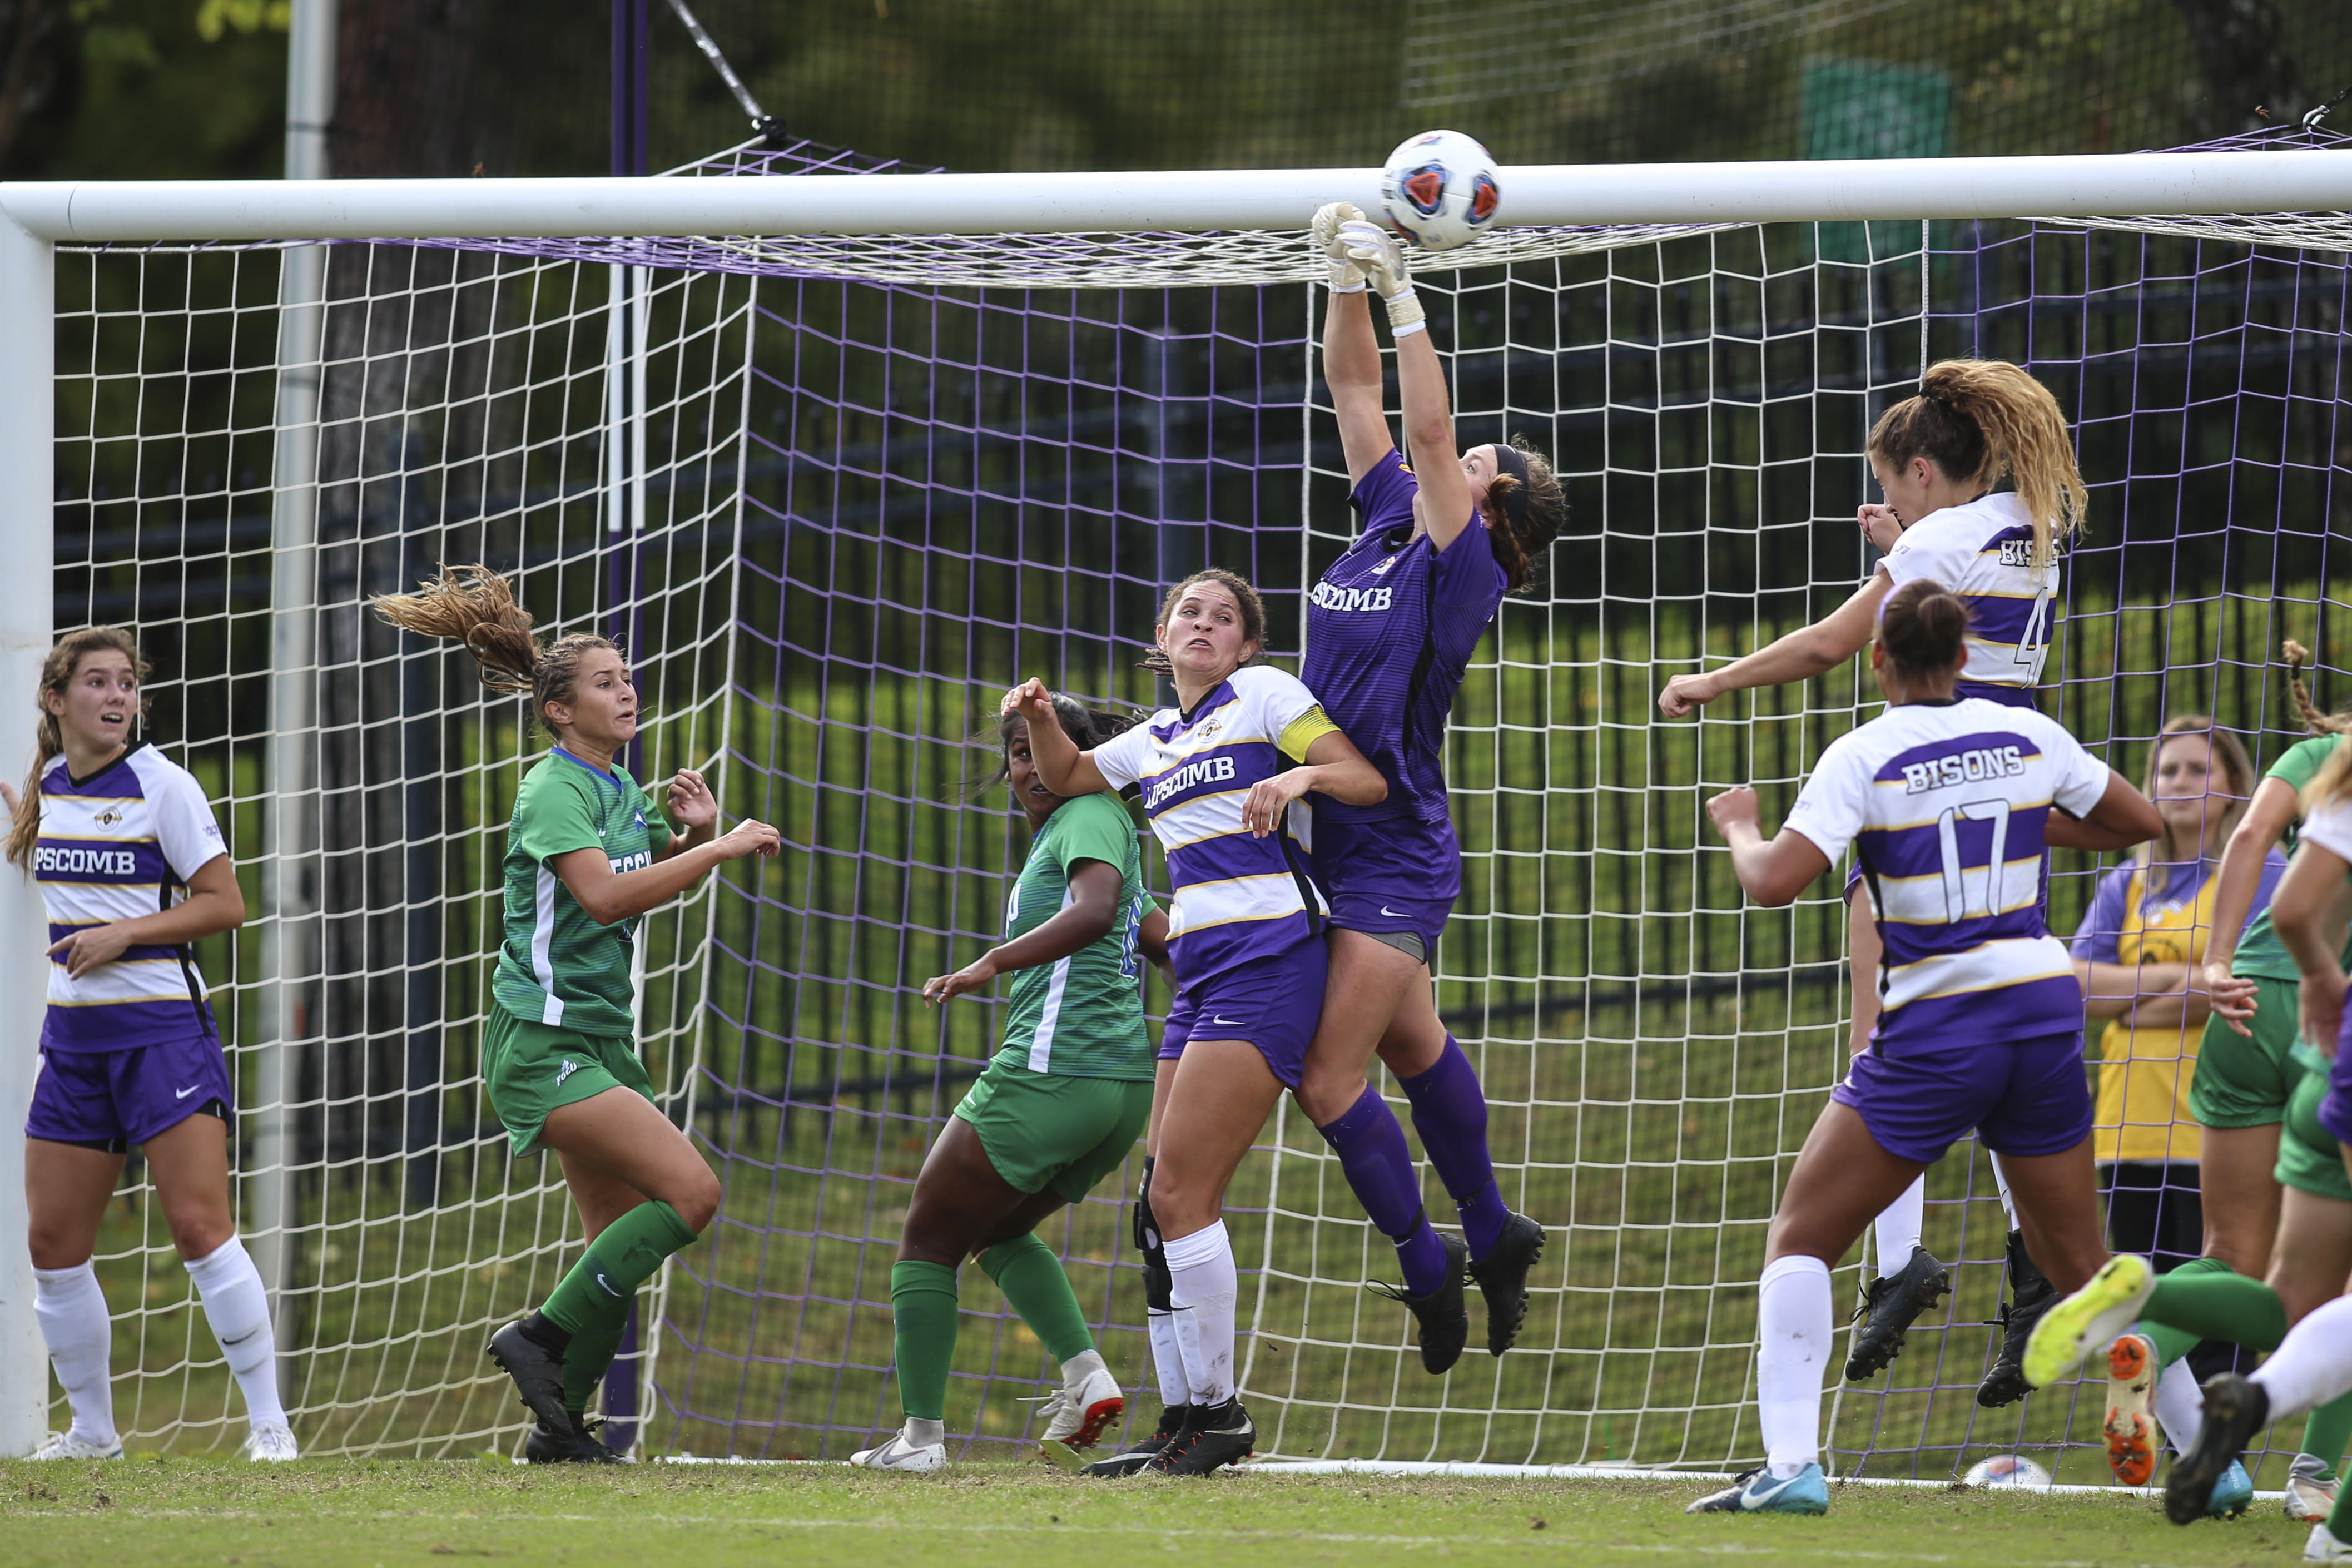 Lipscomb womenâ€™s soccer finally gets over FGCU hurdle, clinches NCAA ...